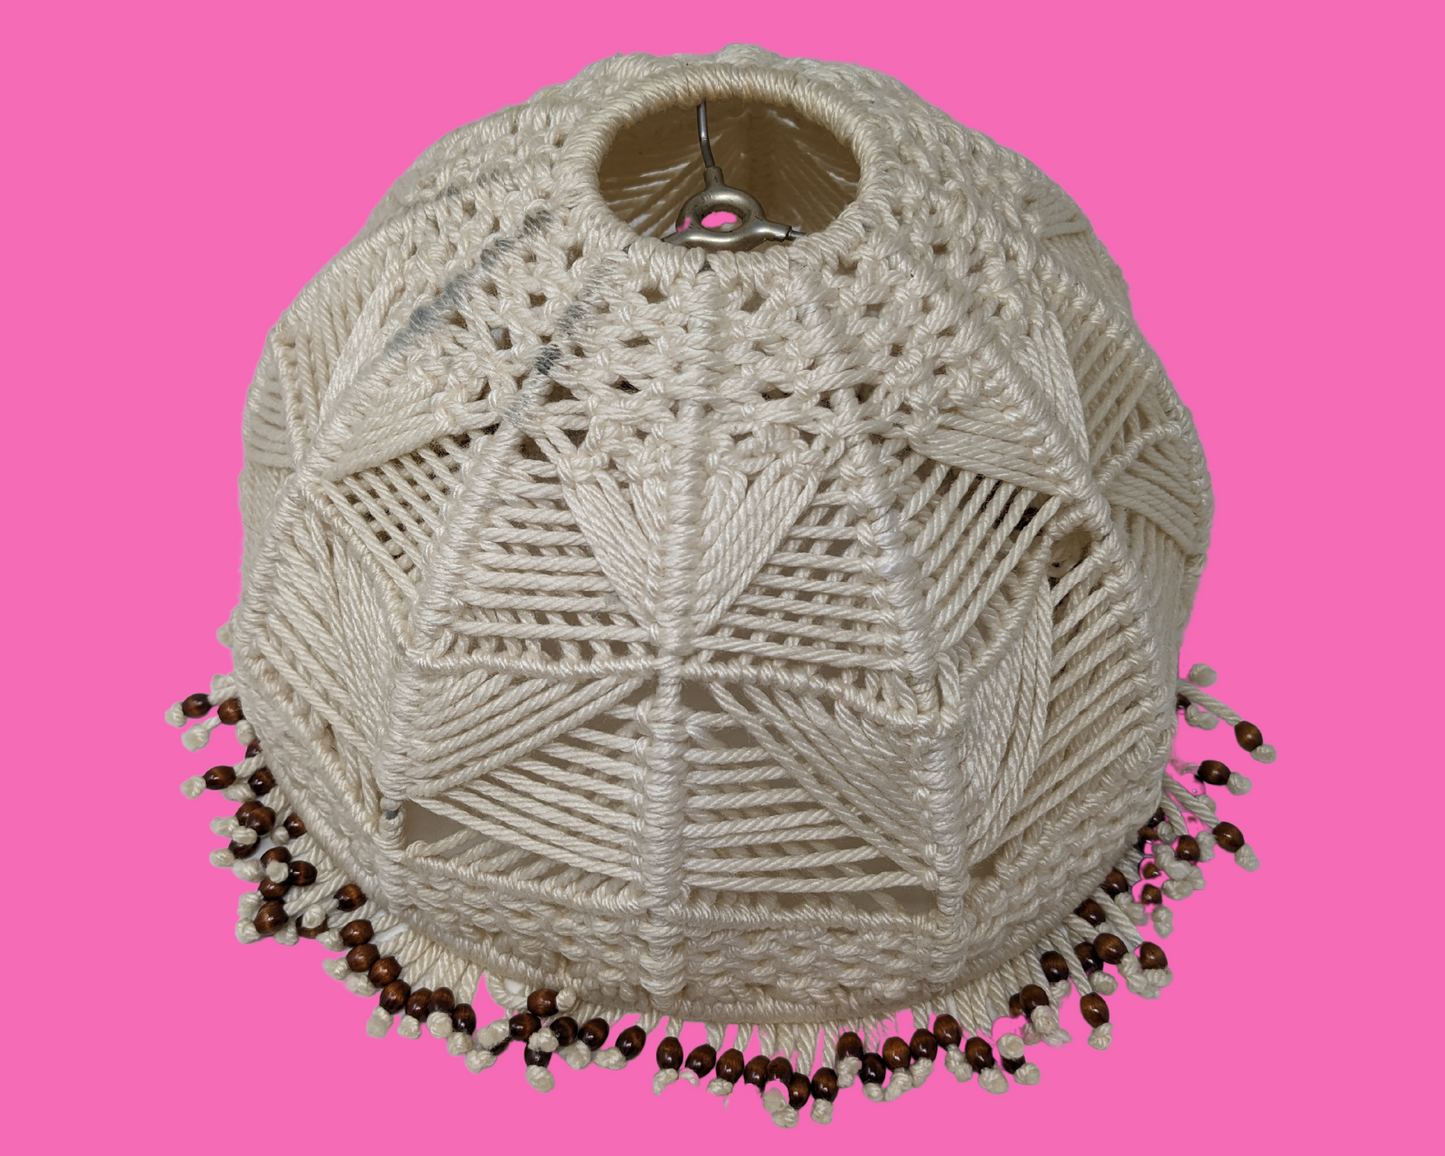 Vintage 1970's White Wool, Crochet, Macrame Lamp Shade with Beads